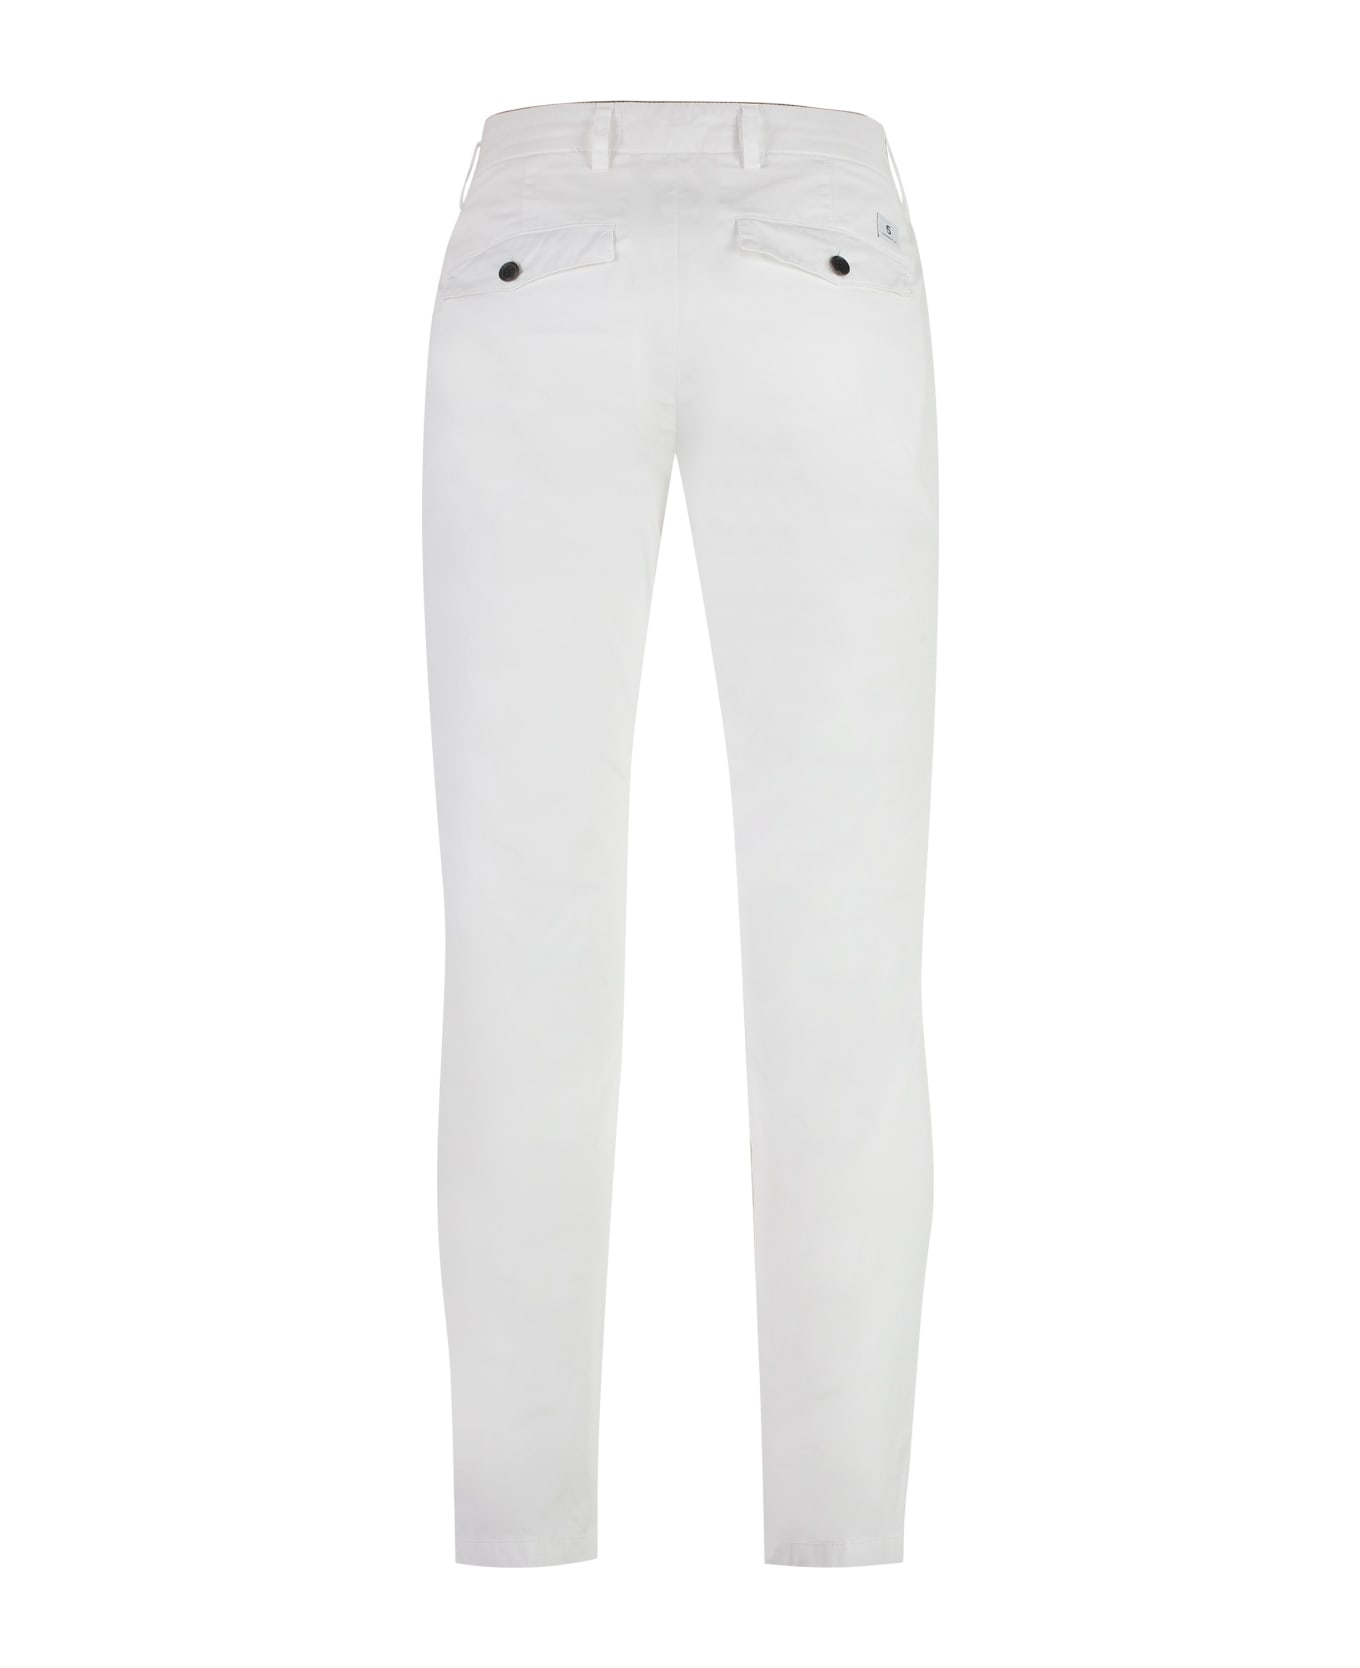 Department Five Prince Chino Pants - White